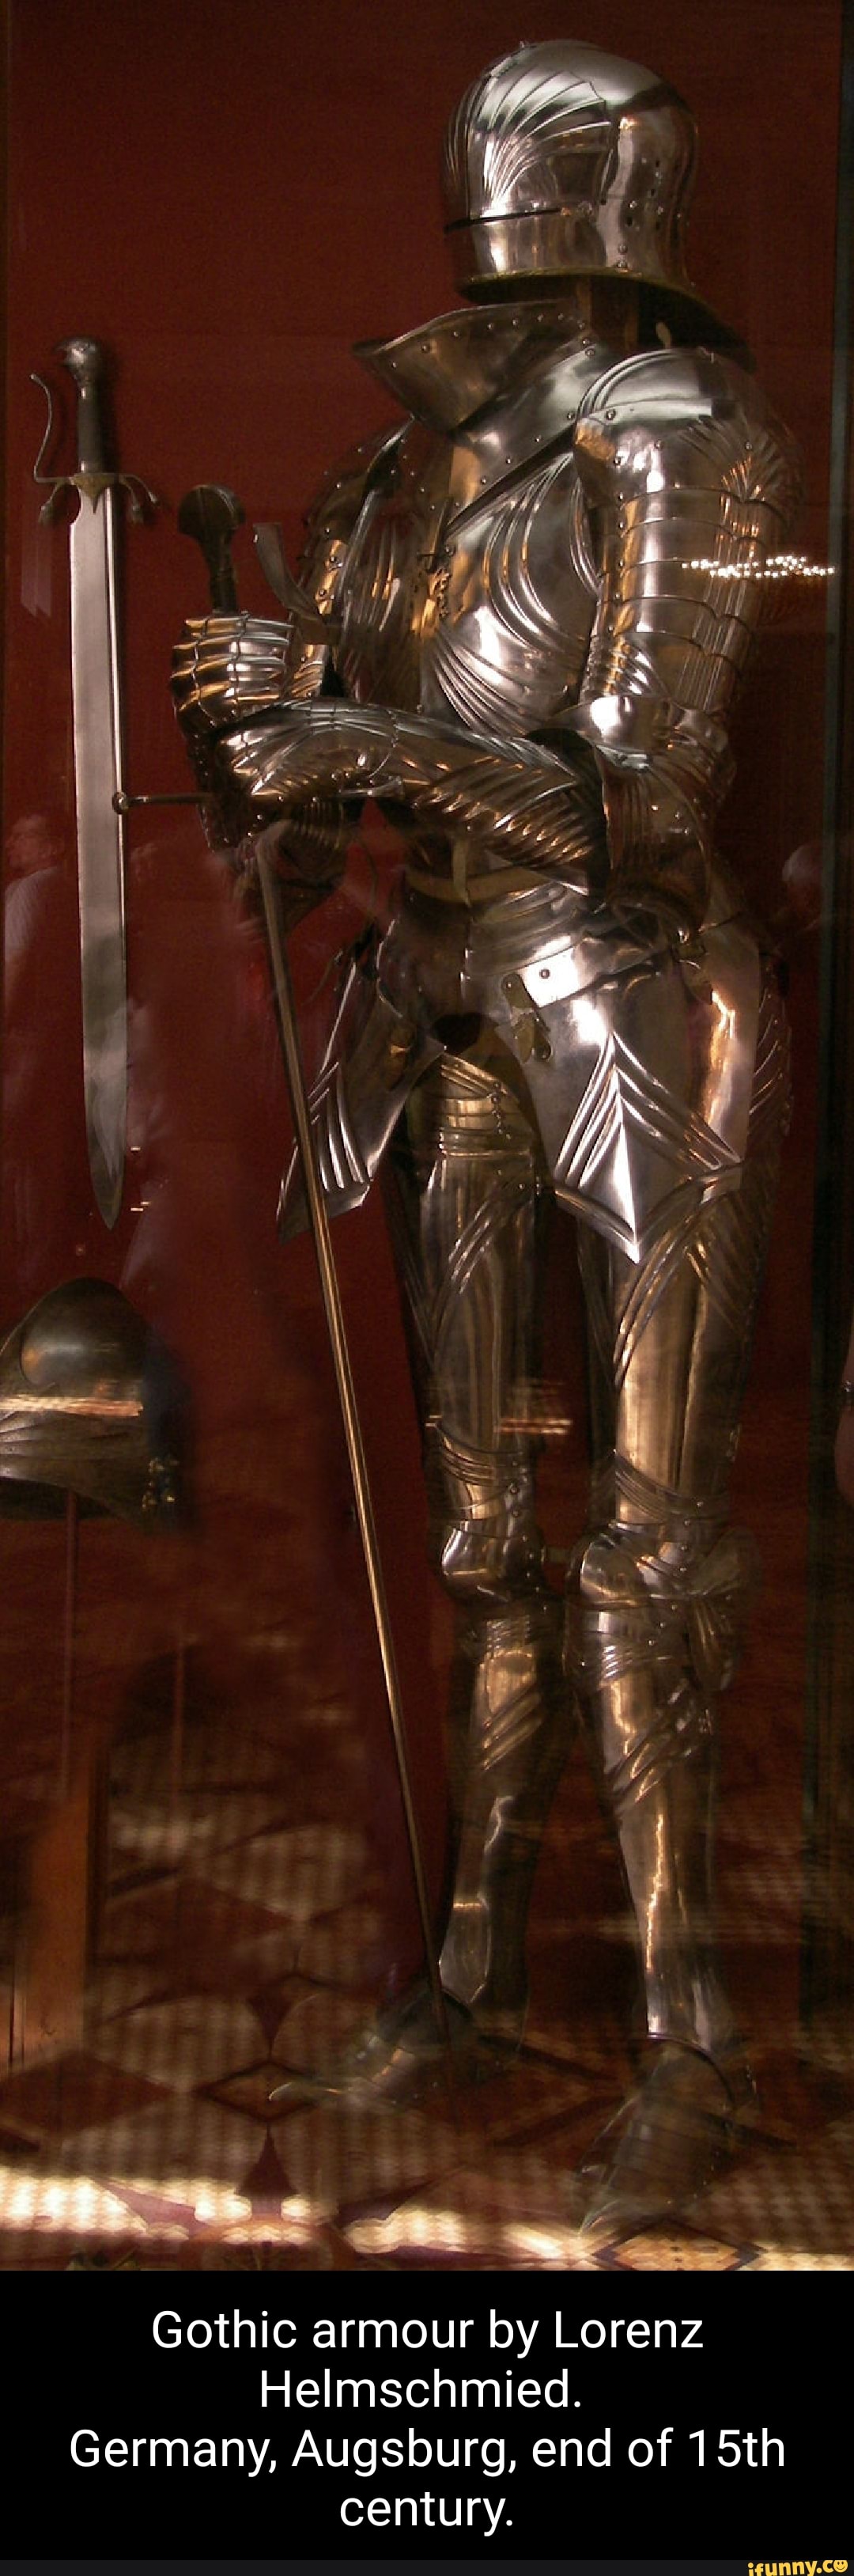 Hel mschmied Germany Augsburg end of 15th century He Gothic armour